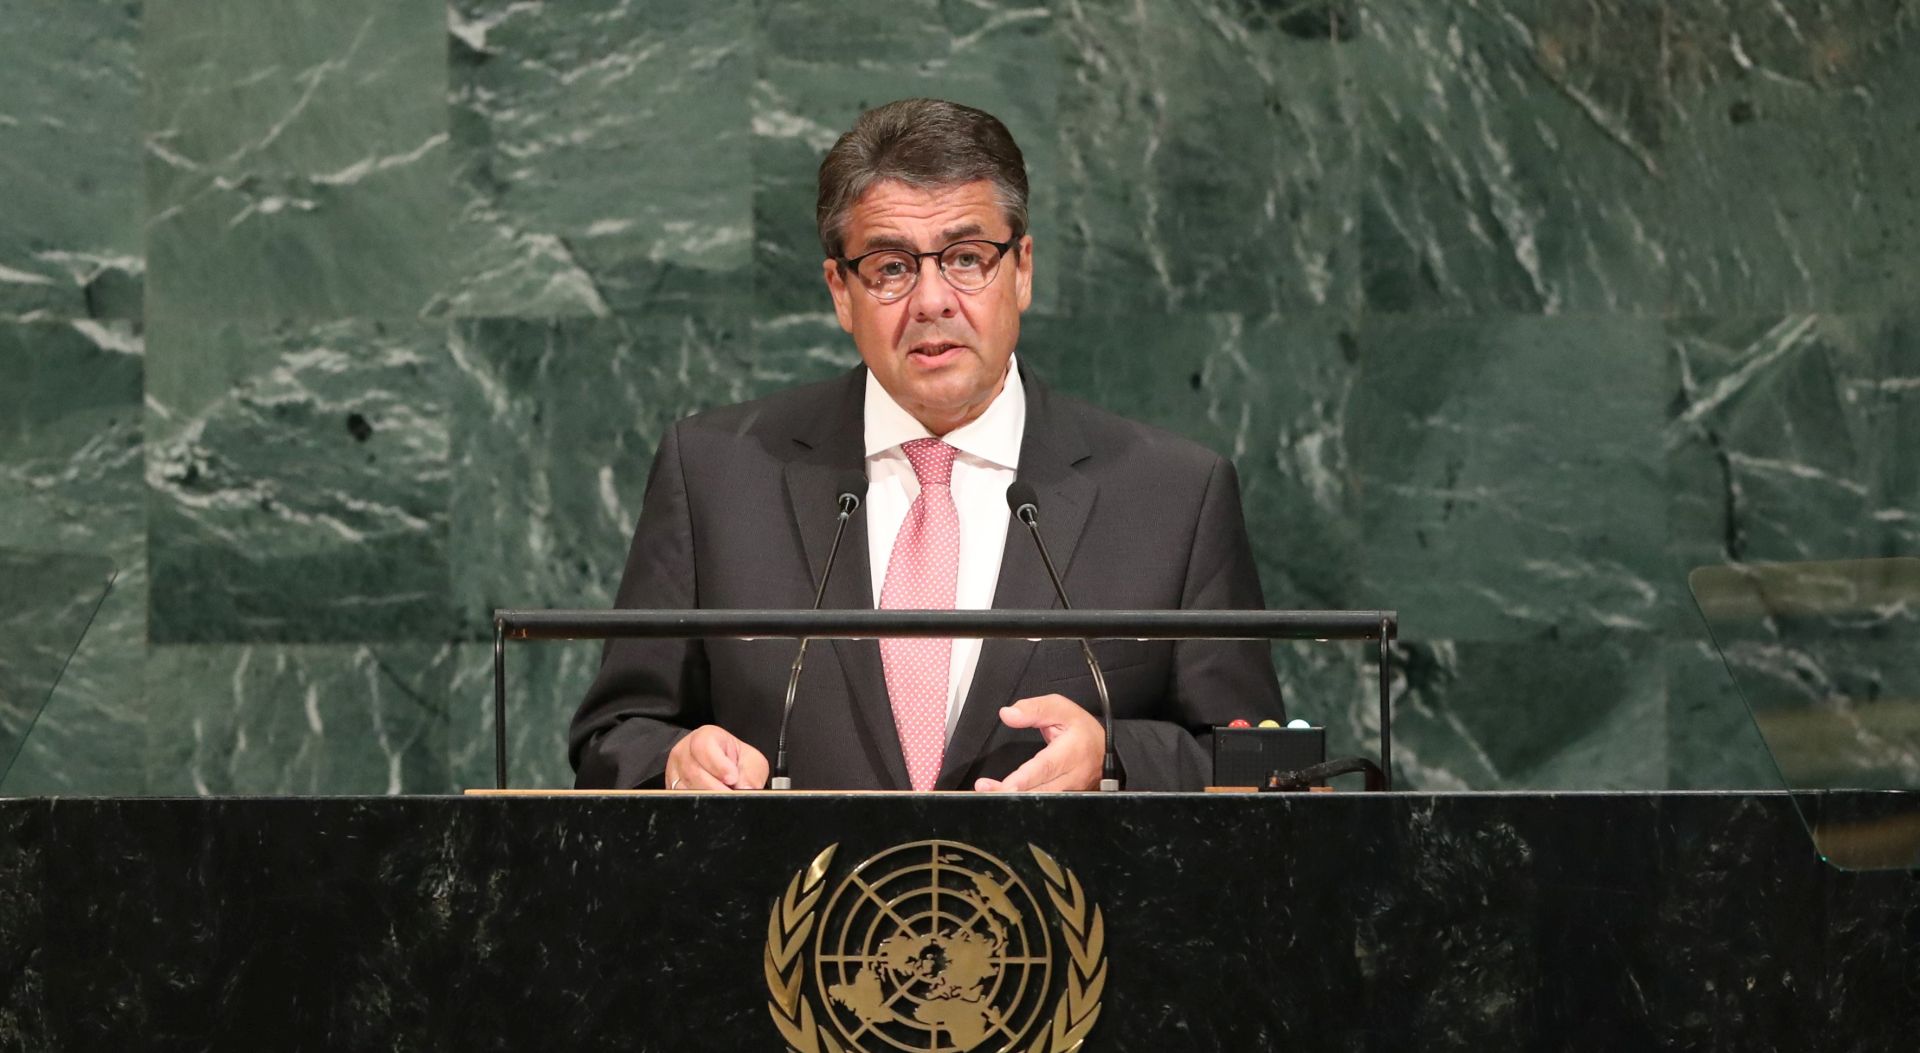 epa06218141 Sigmar Gabriel, Vice-Chancellor of Germany, speaks during the General Debate of the 72nd United Nations General Assembly at UN headquarters in New York, New York, USA, 21 September 2017. The annual gathering of world leaders formally opened on 19 September 2017, with the theme, 'Focusing on People: Striving for Peace and a Decent Life for All on a Sustainable Planet.'  EPA/ANDREW GOMBERT